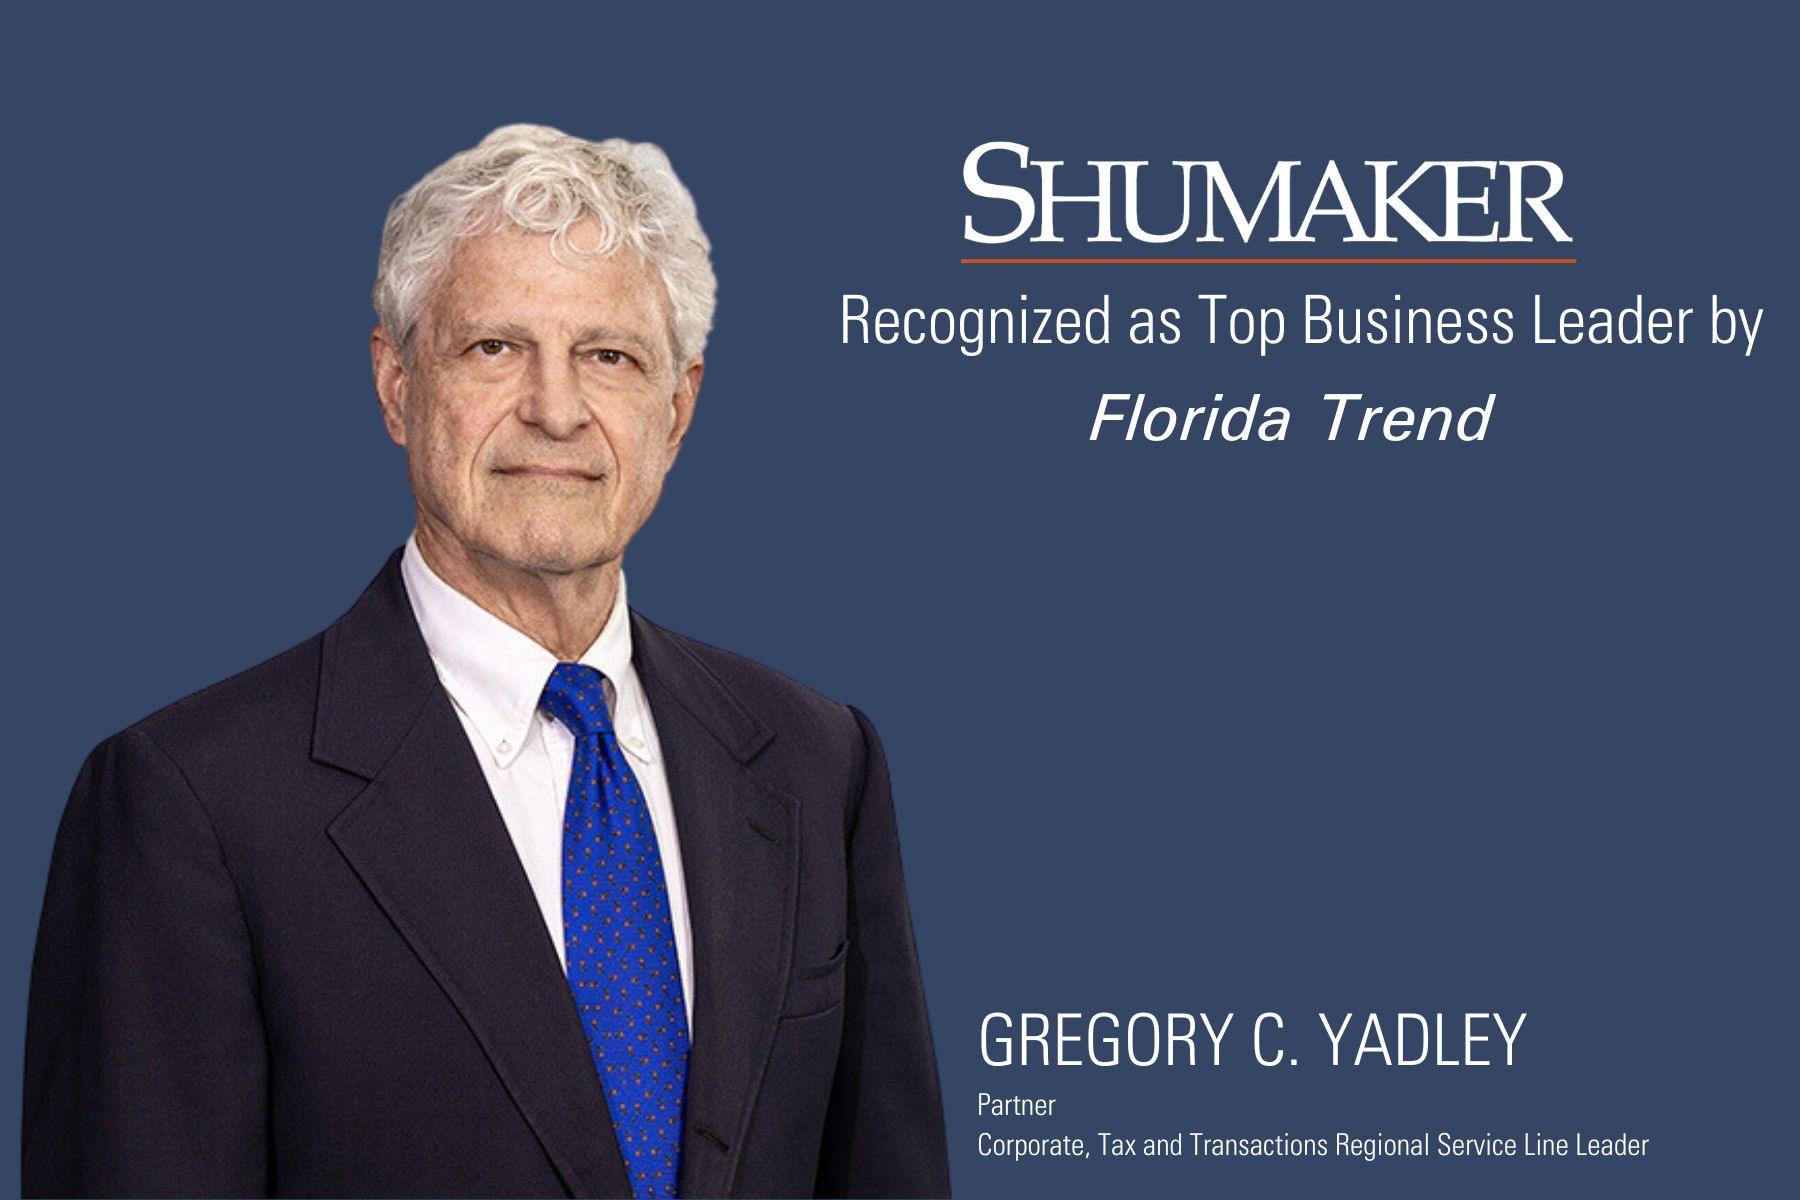 Gregory C. Yadley Recognized as Top Business Leader for Fifth Consecutive Year